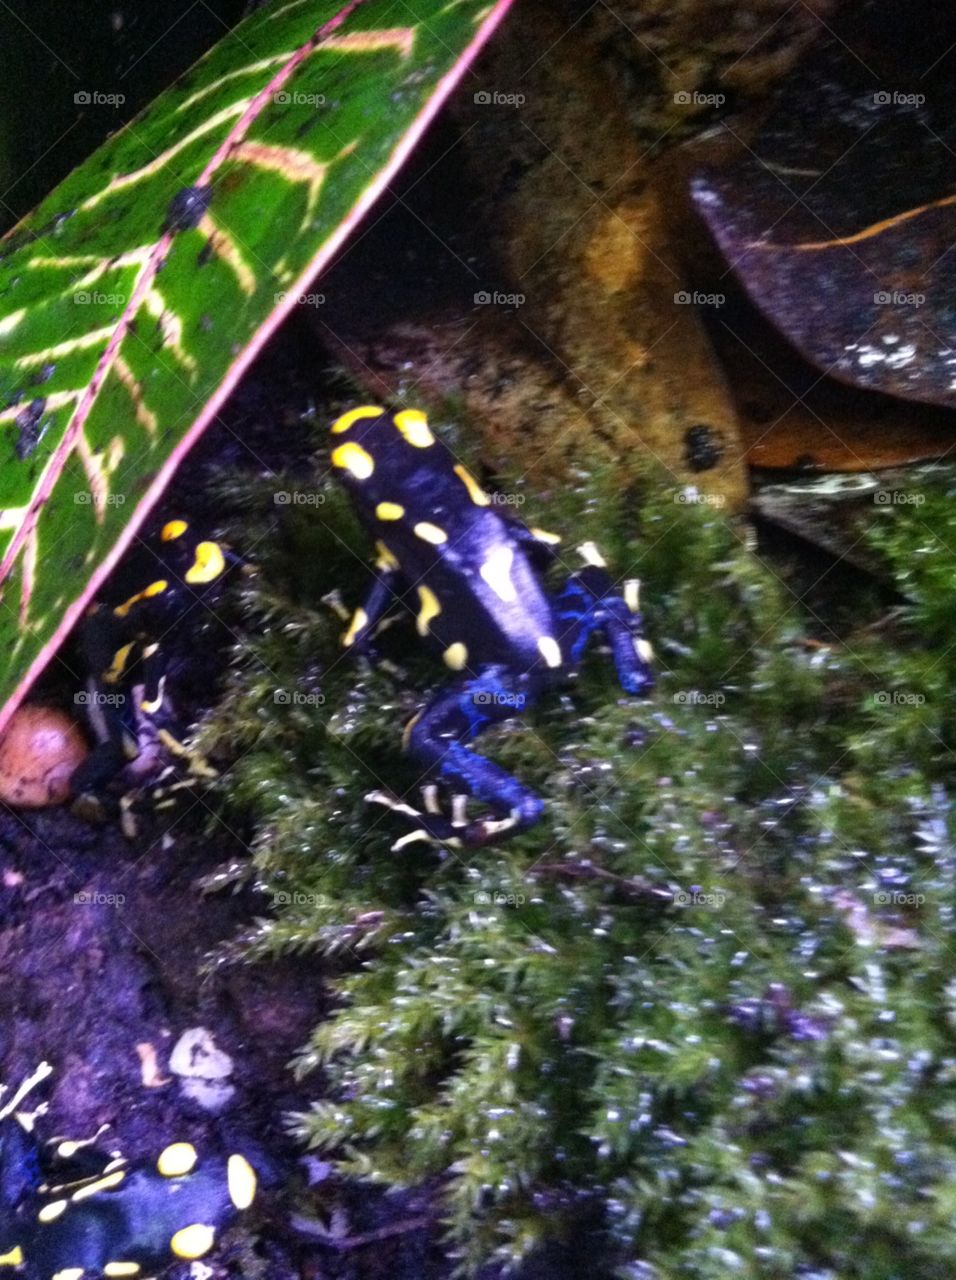 Mother Nature has the best colors! These dart frogs are beauties